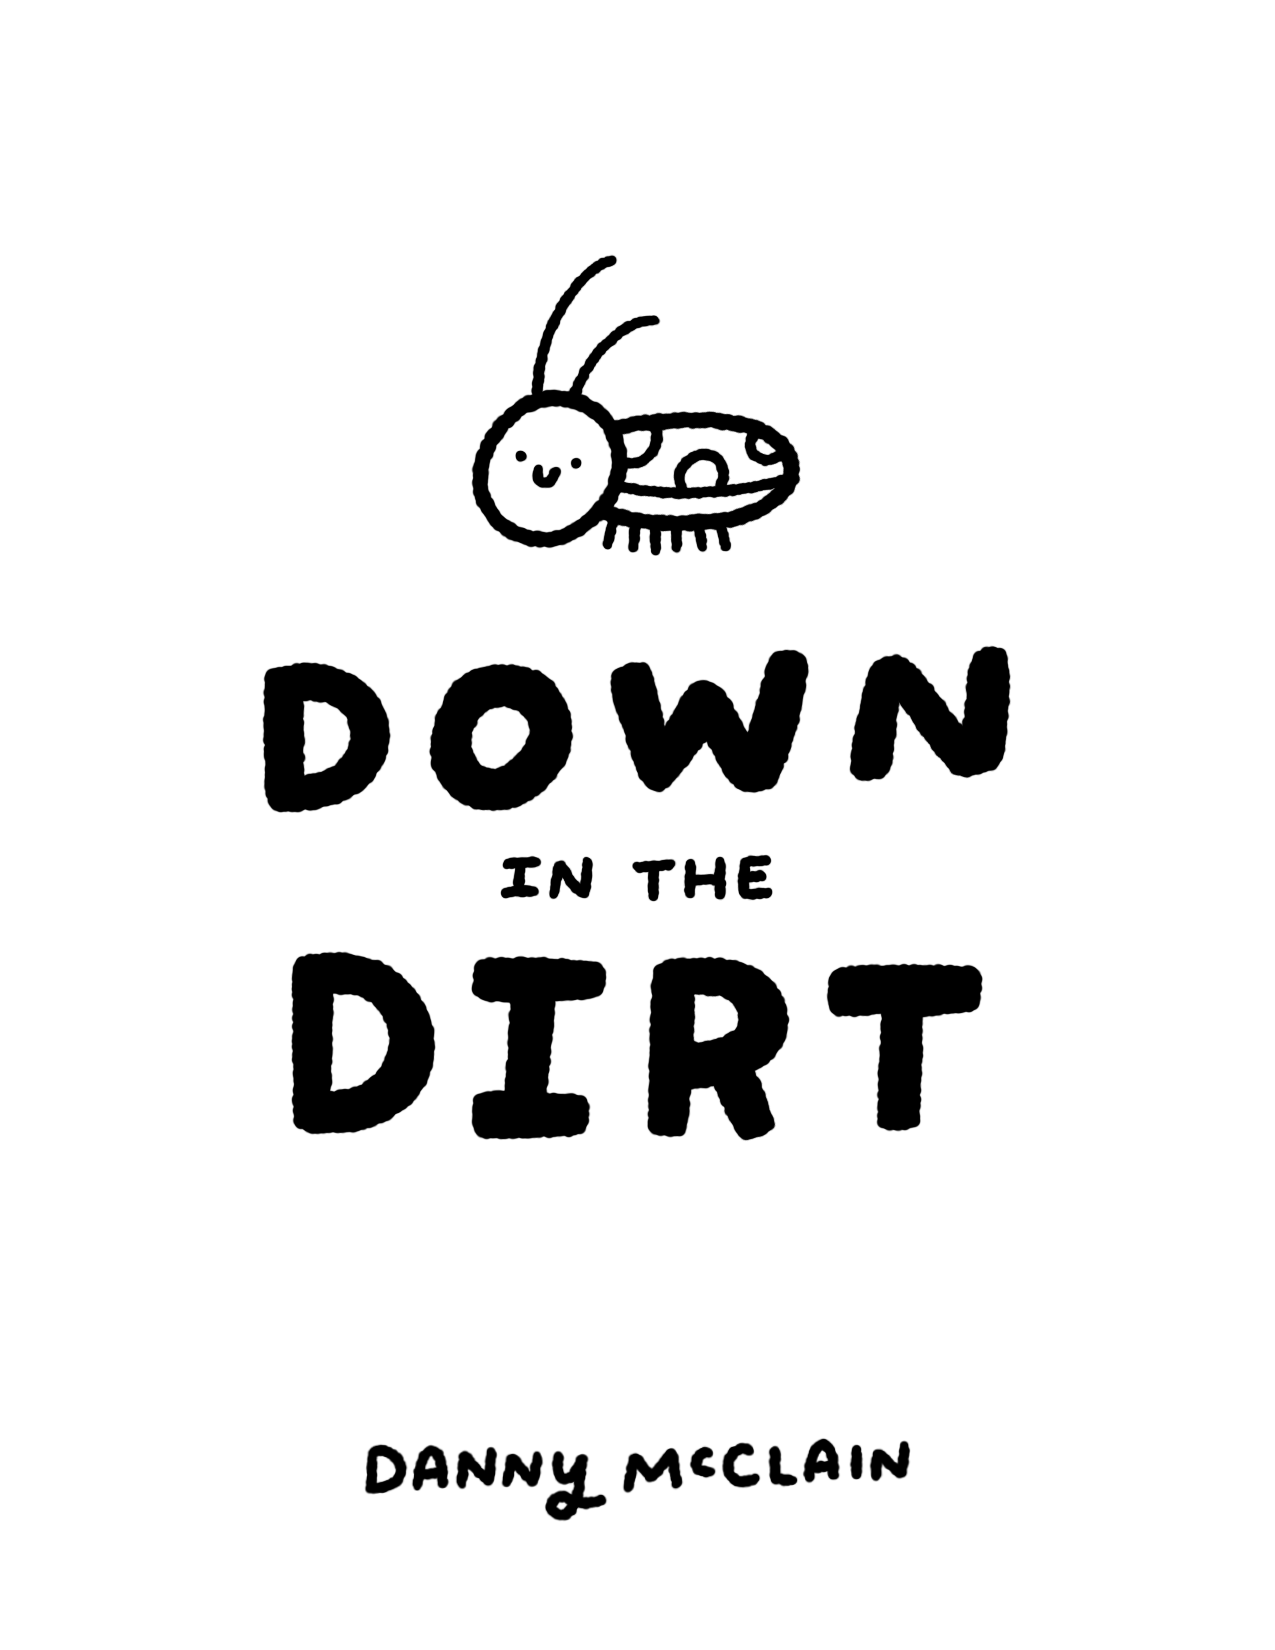 Down in the Dirt